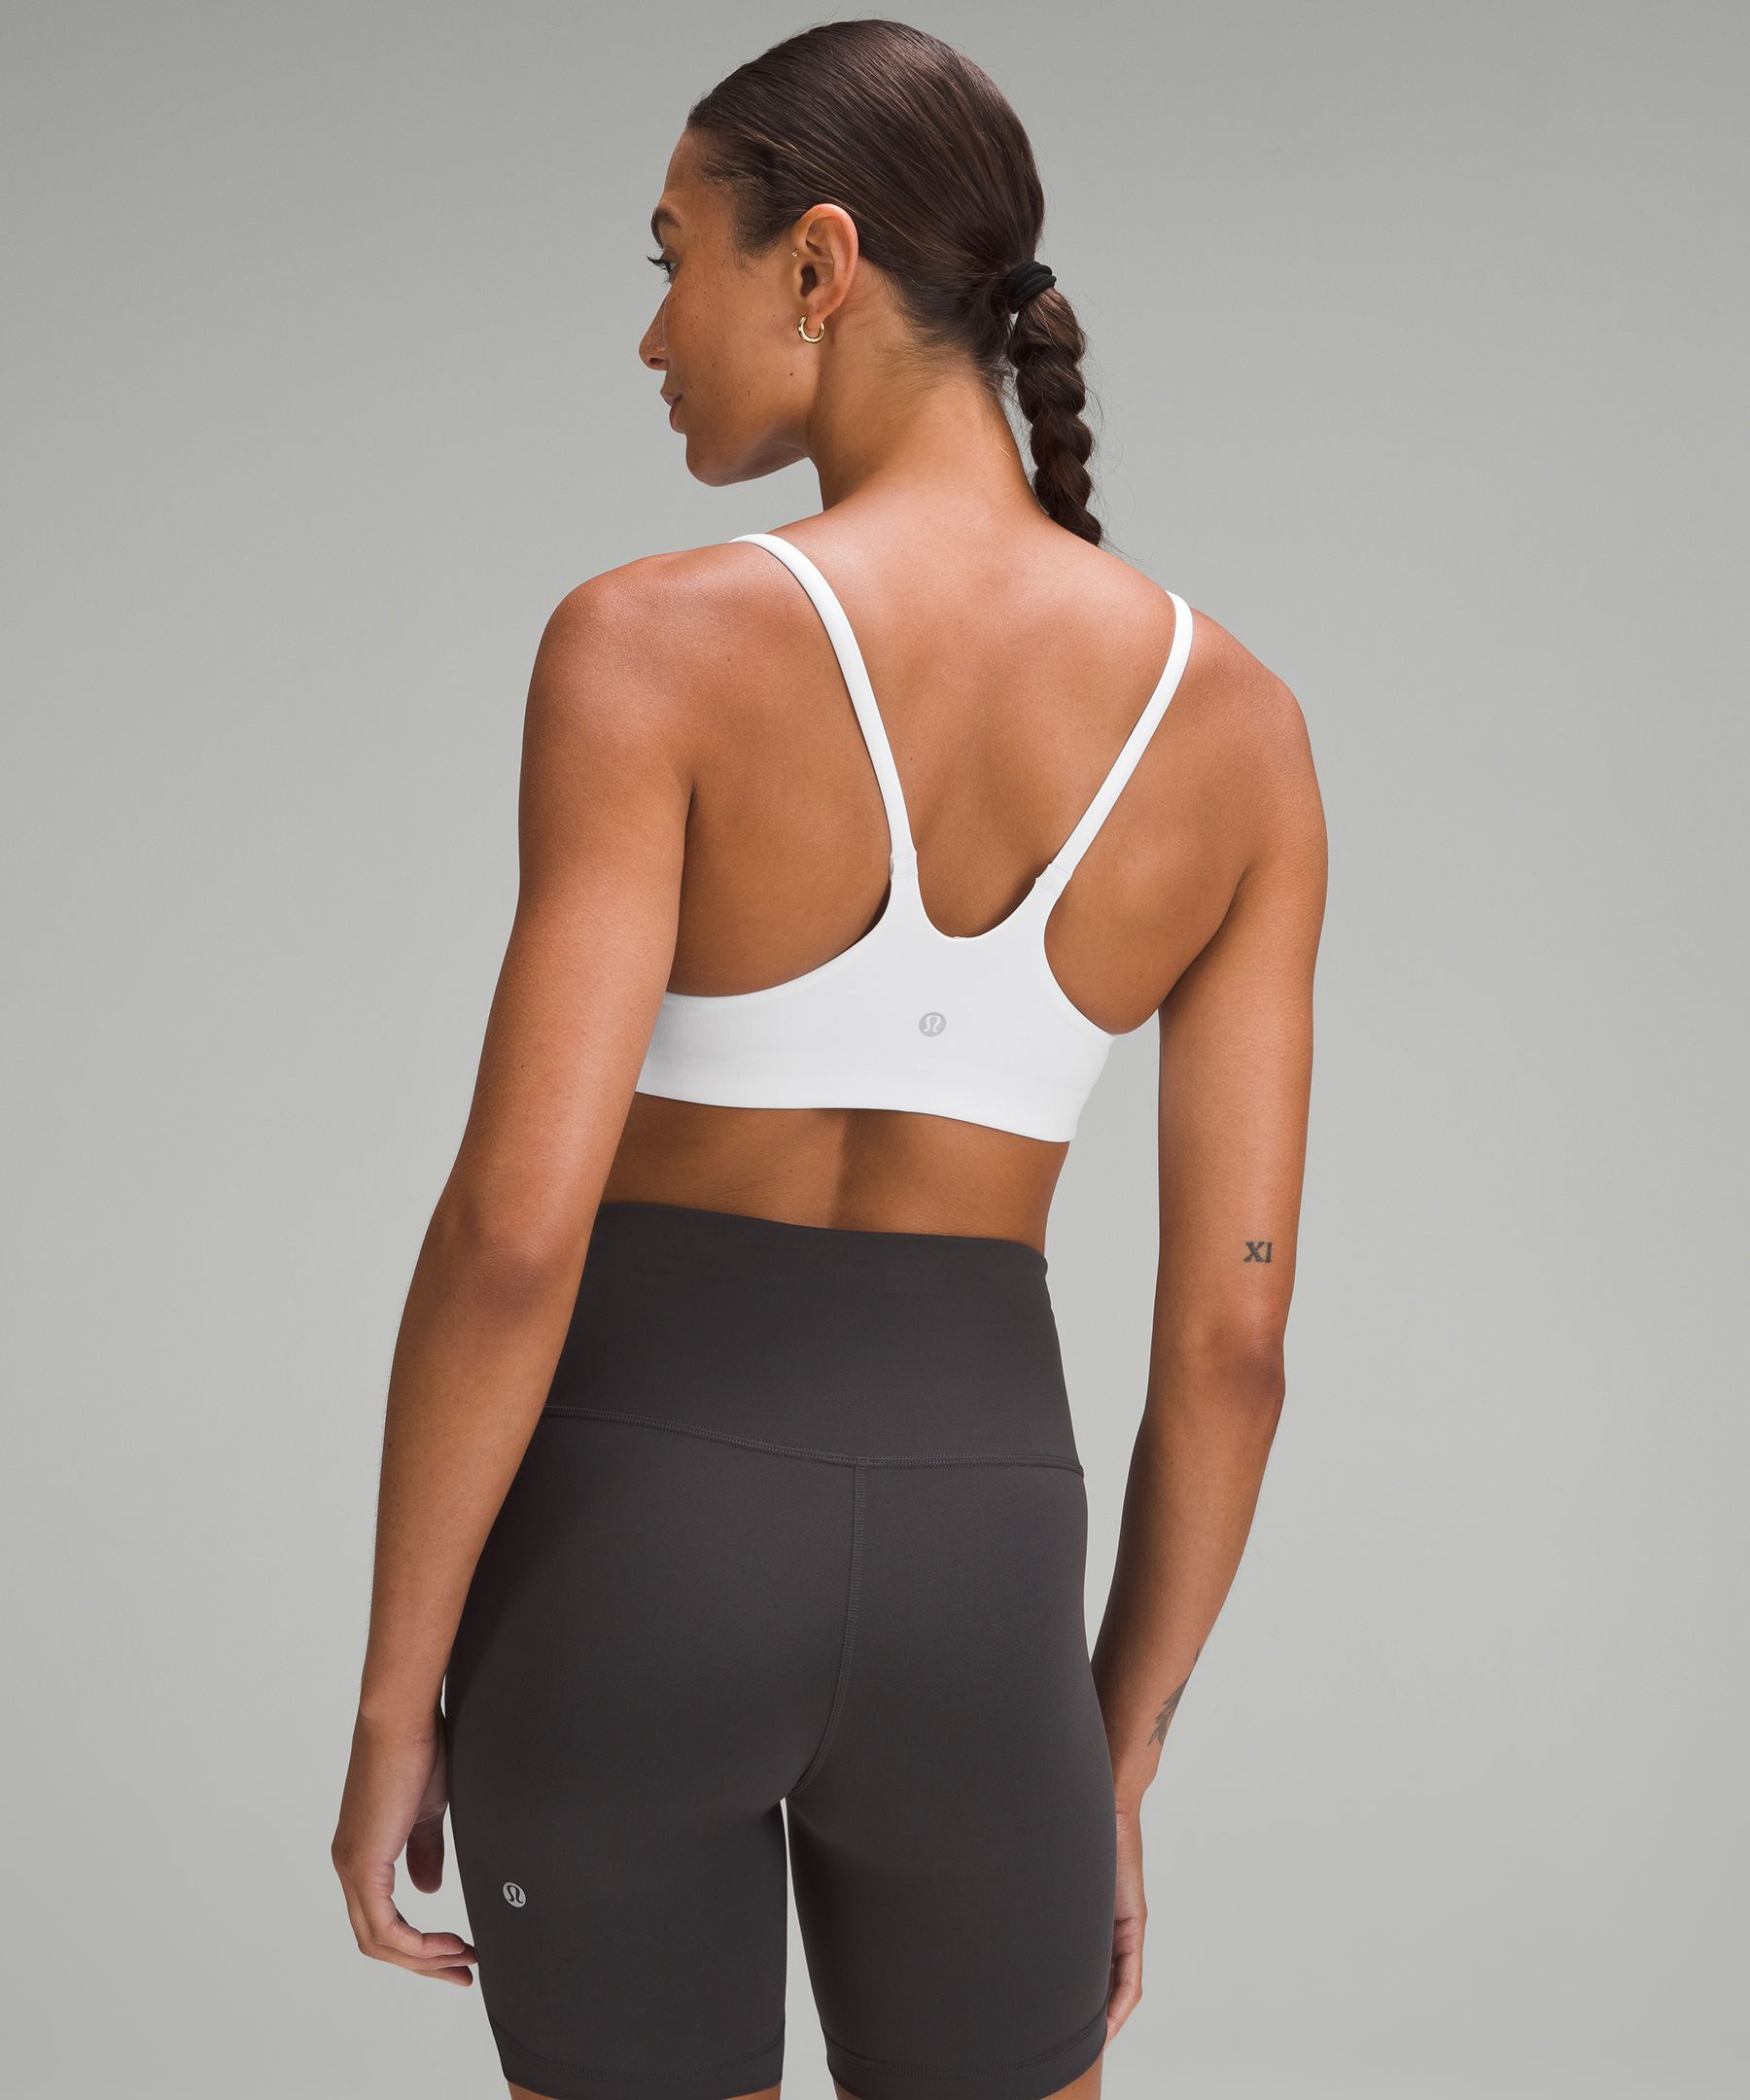 Lululemon Black Ruched Middle Sports Bra Size 10 - $30 - From